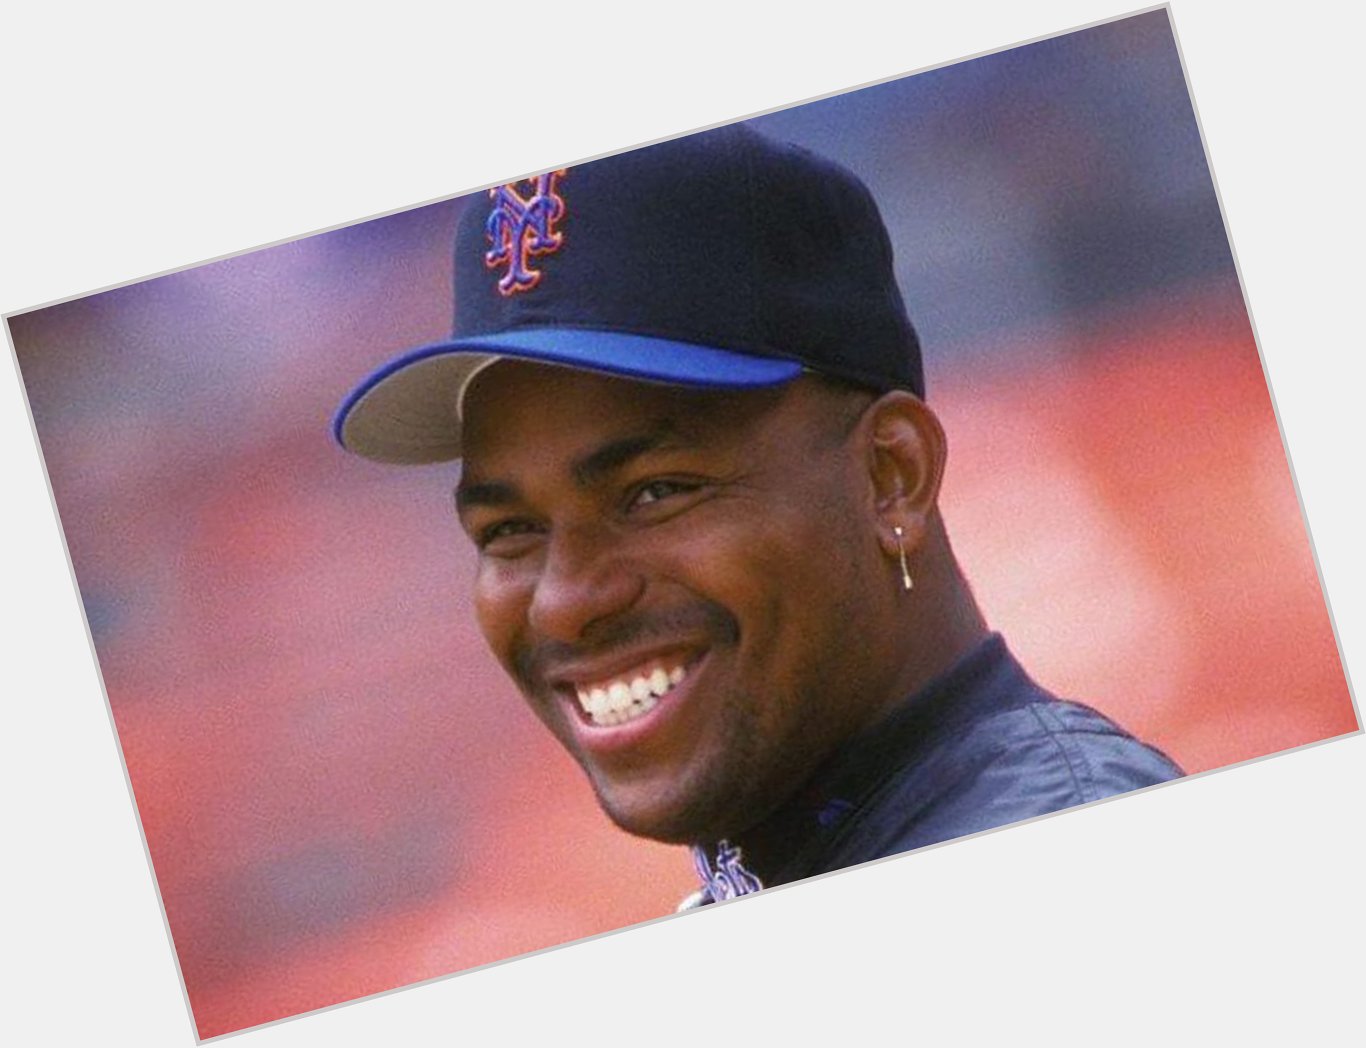 Happy 59th birthday to Bobby Bonilla!

Hey did you know that the Mets... 